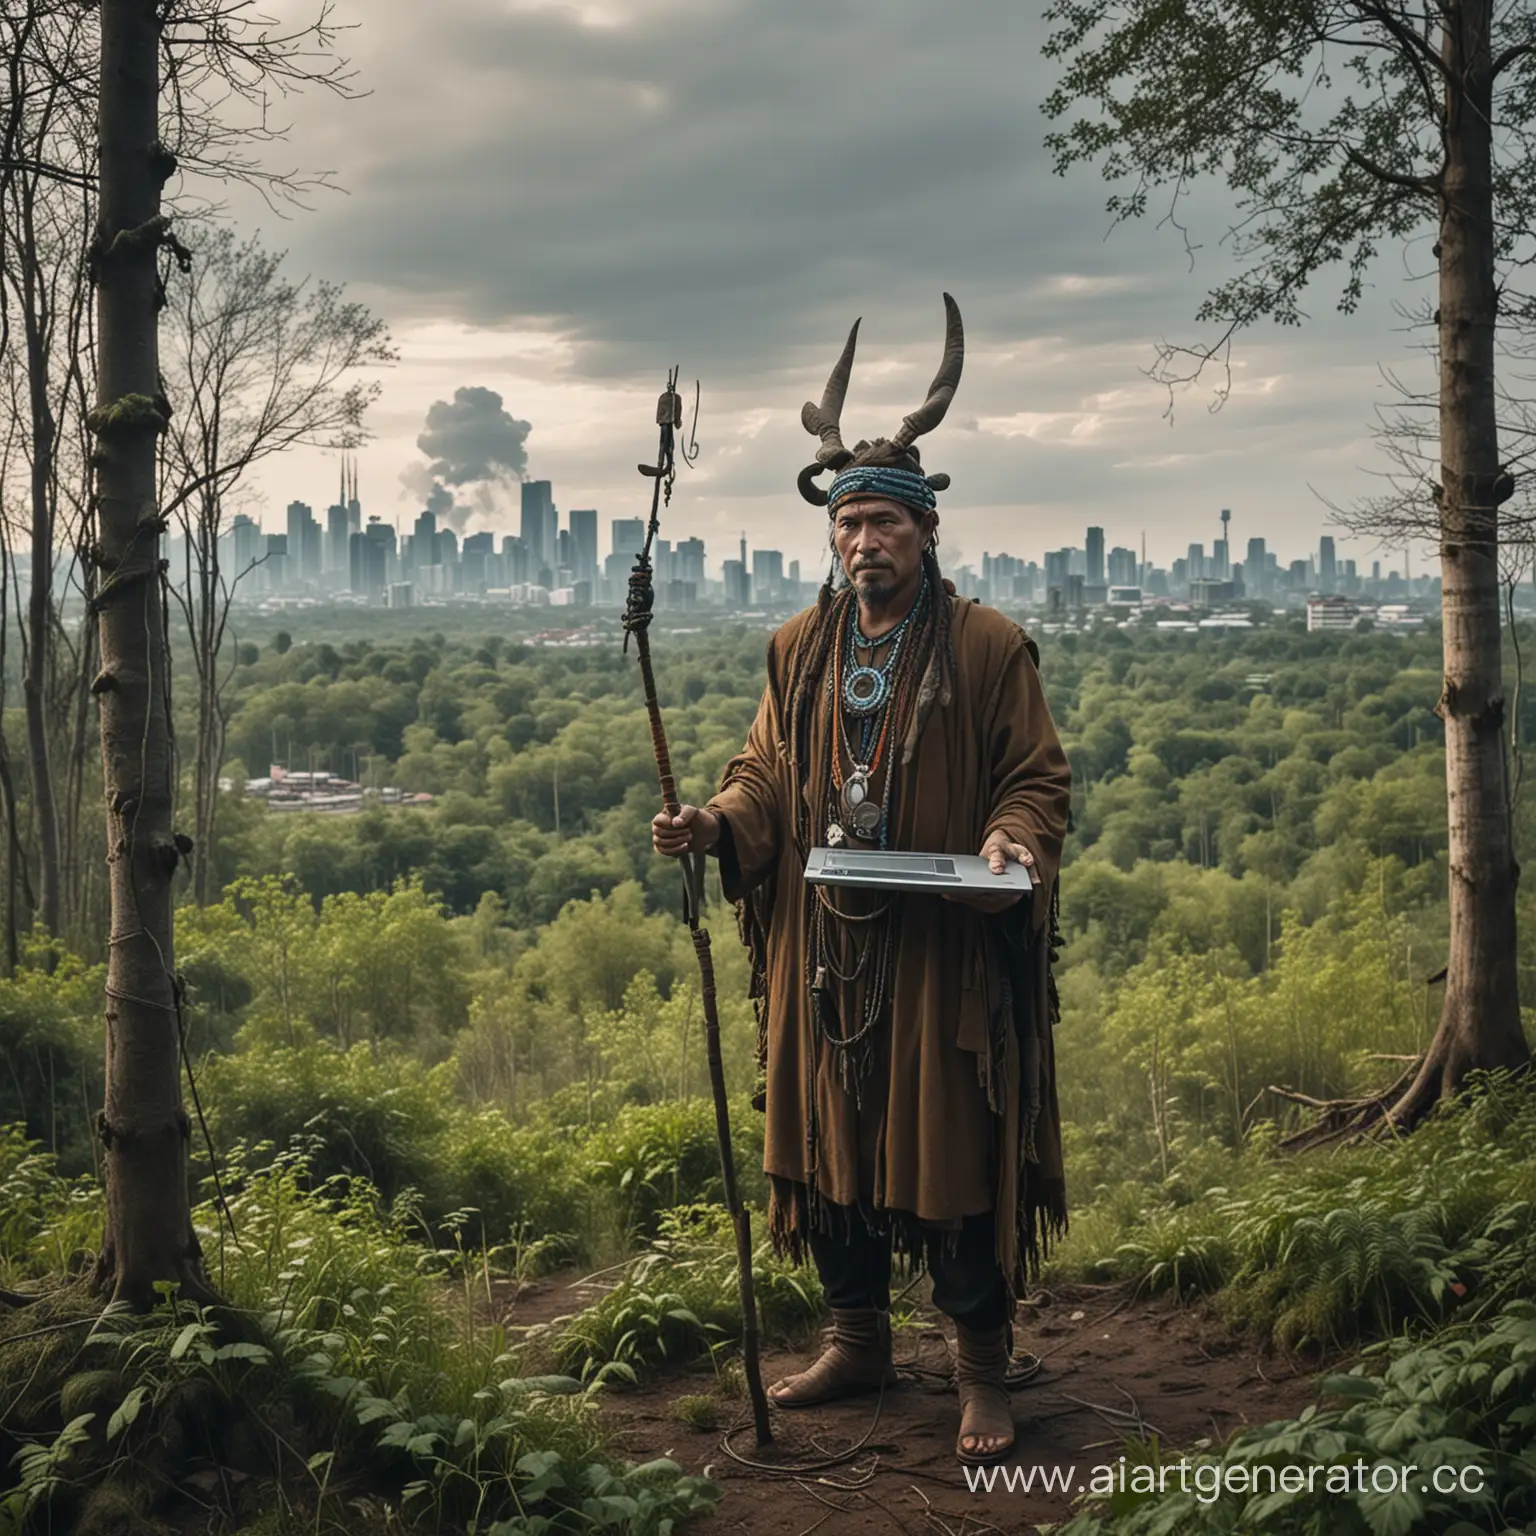 Shaman-in-Forest-with-Laptop-Connected-to-City-Skyline